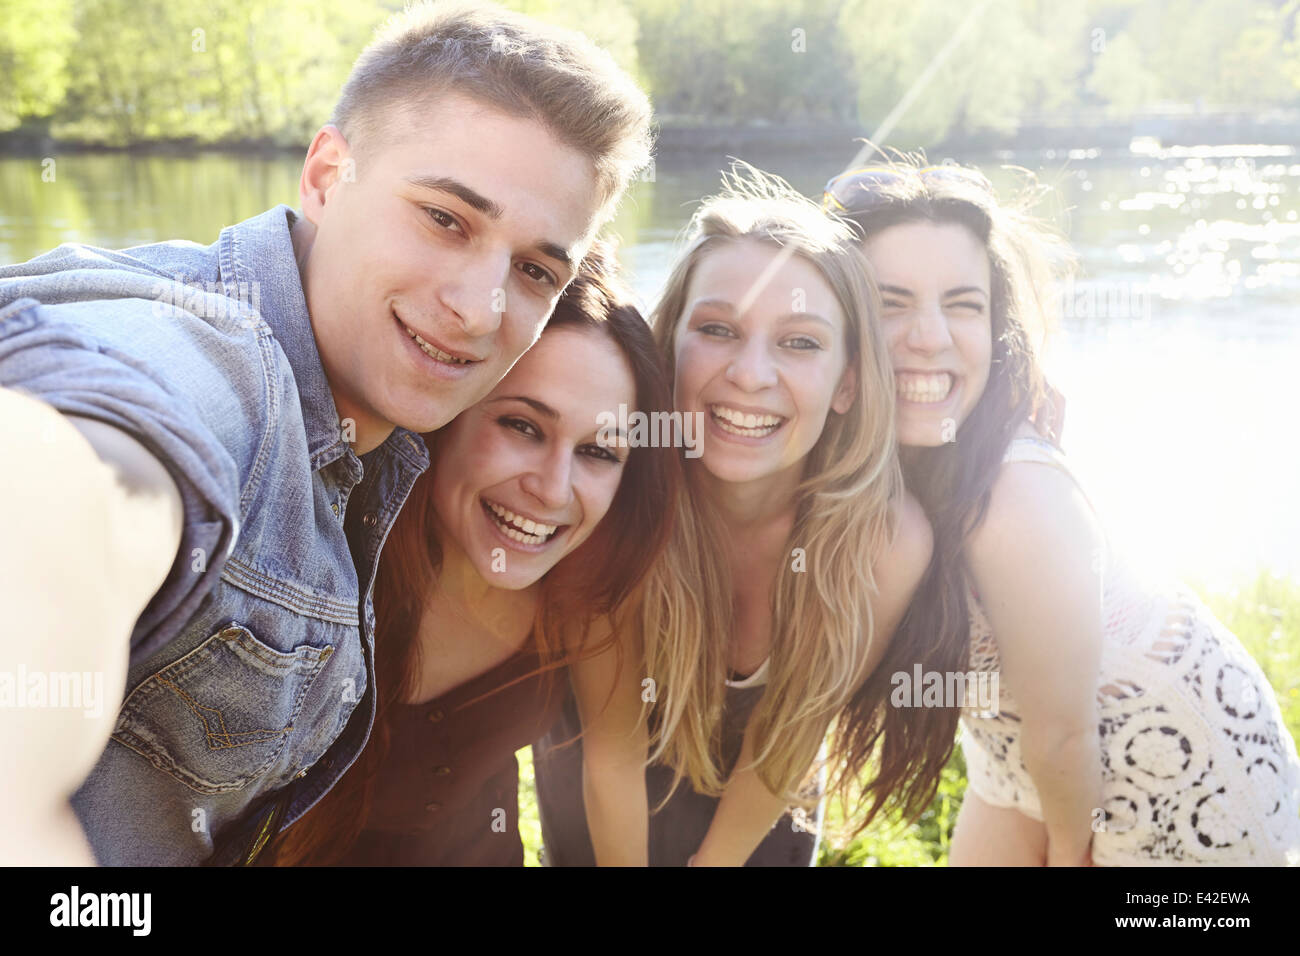 Group of friends in sunlight, posing Stock Photo